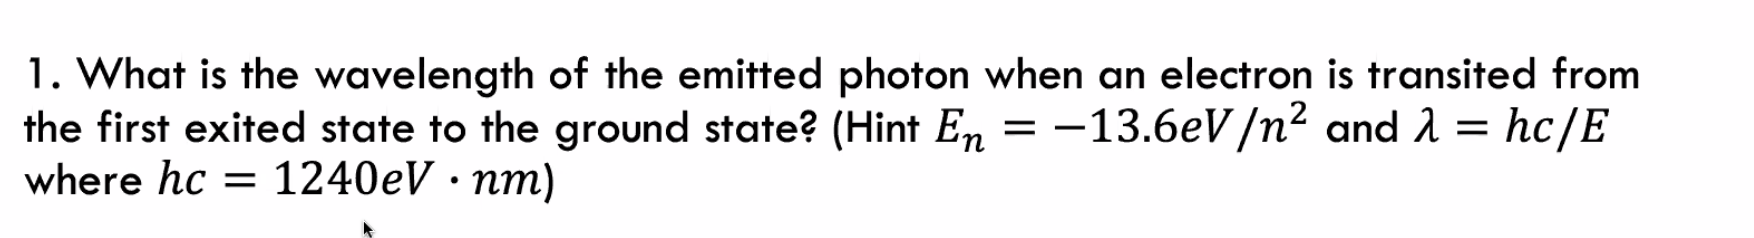 1. What is the wavelength of the emitted photon when an electron is transited from
the first exited state to the ground state? (Hint En = -13.6eV/n² and 2 = hc/E
where hc = 1240eV · nm)
